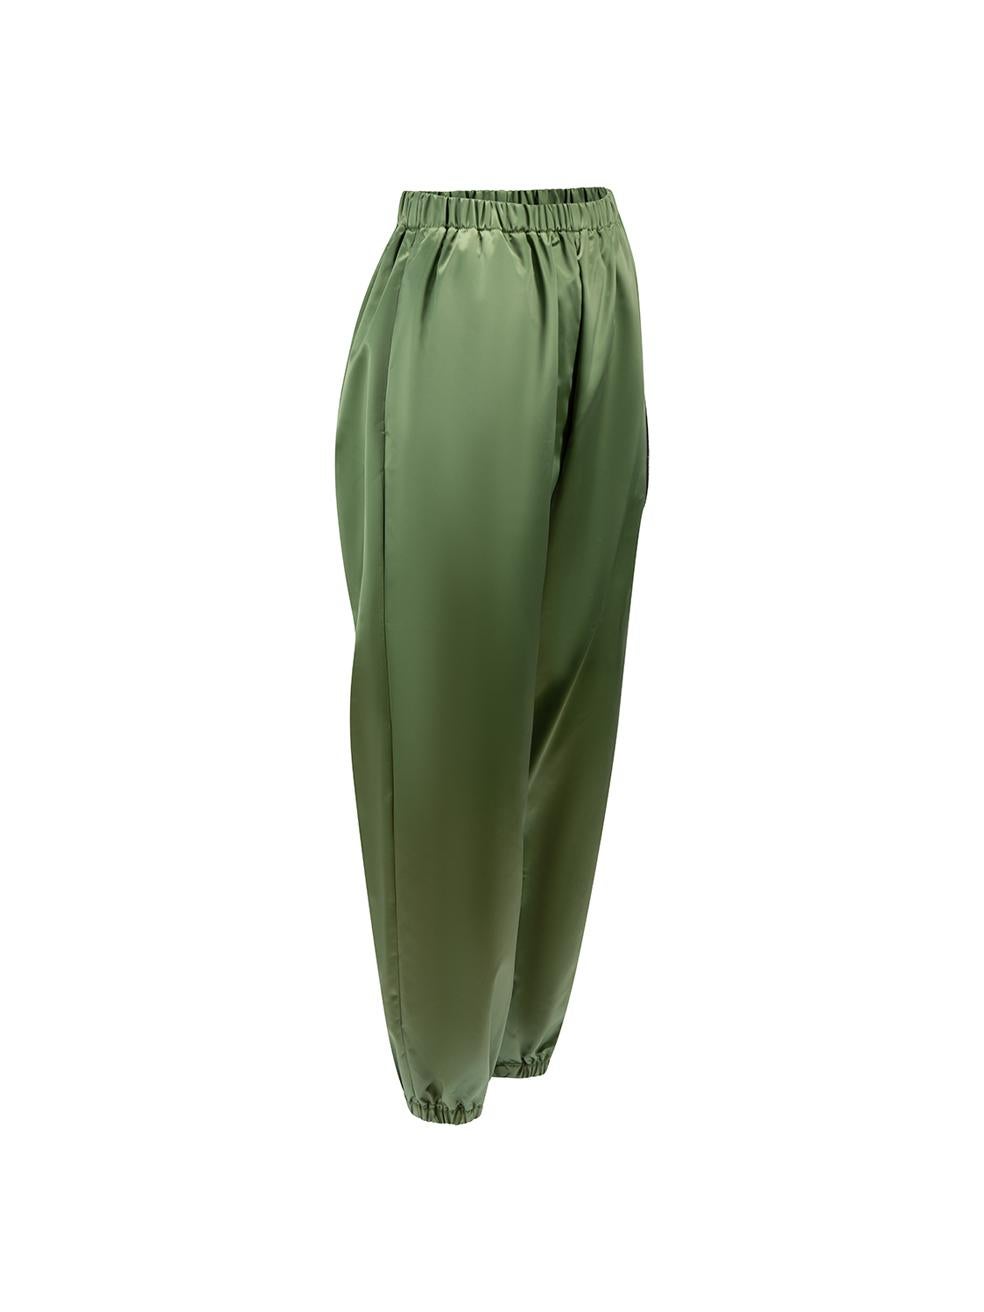 CONDITION is Very good. Minimal wear to trousers is evident. Minimal wear to front waist where minor pulling to thread is evident on this used MM6 Maison Margiela designer resale item.



Details


Green

Synthetic

Sweatpants

High rise

6 logo